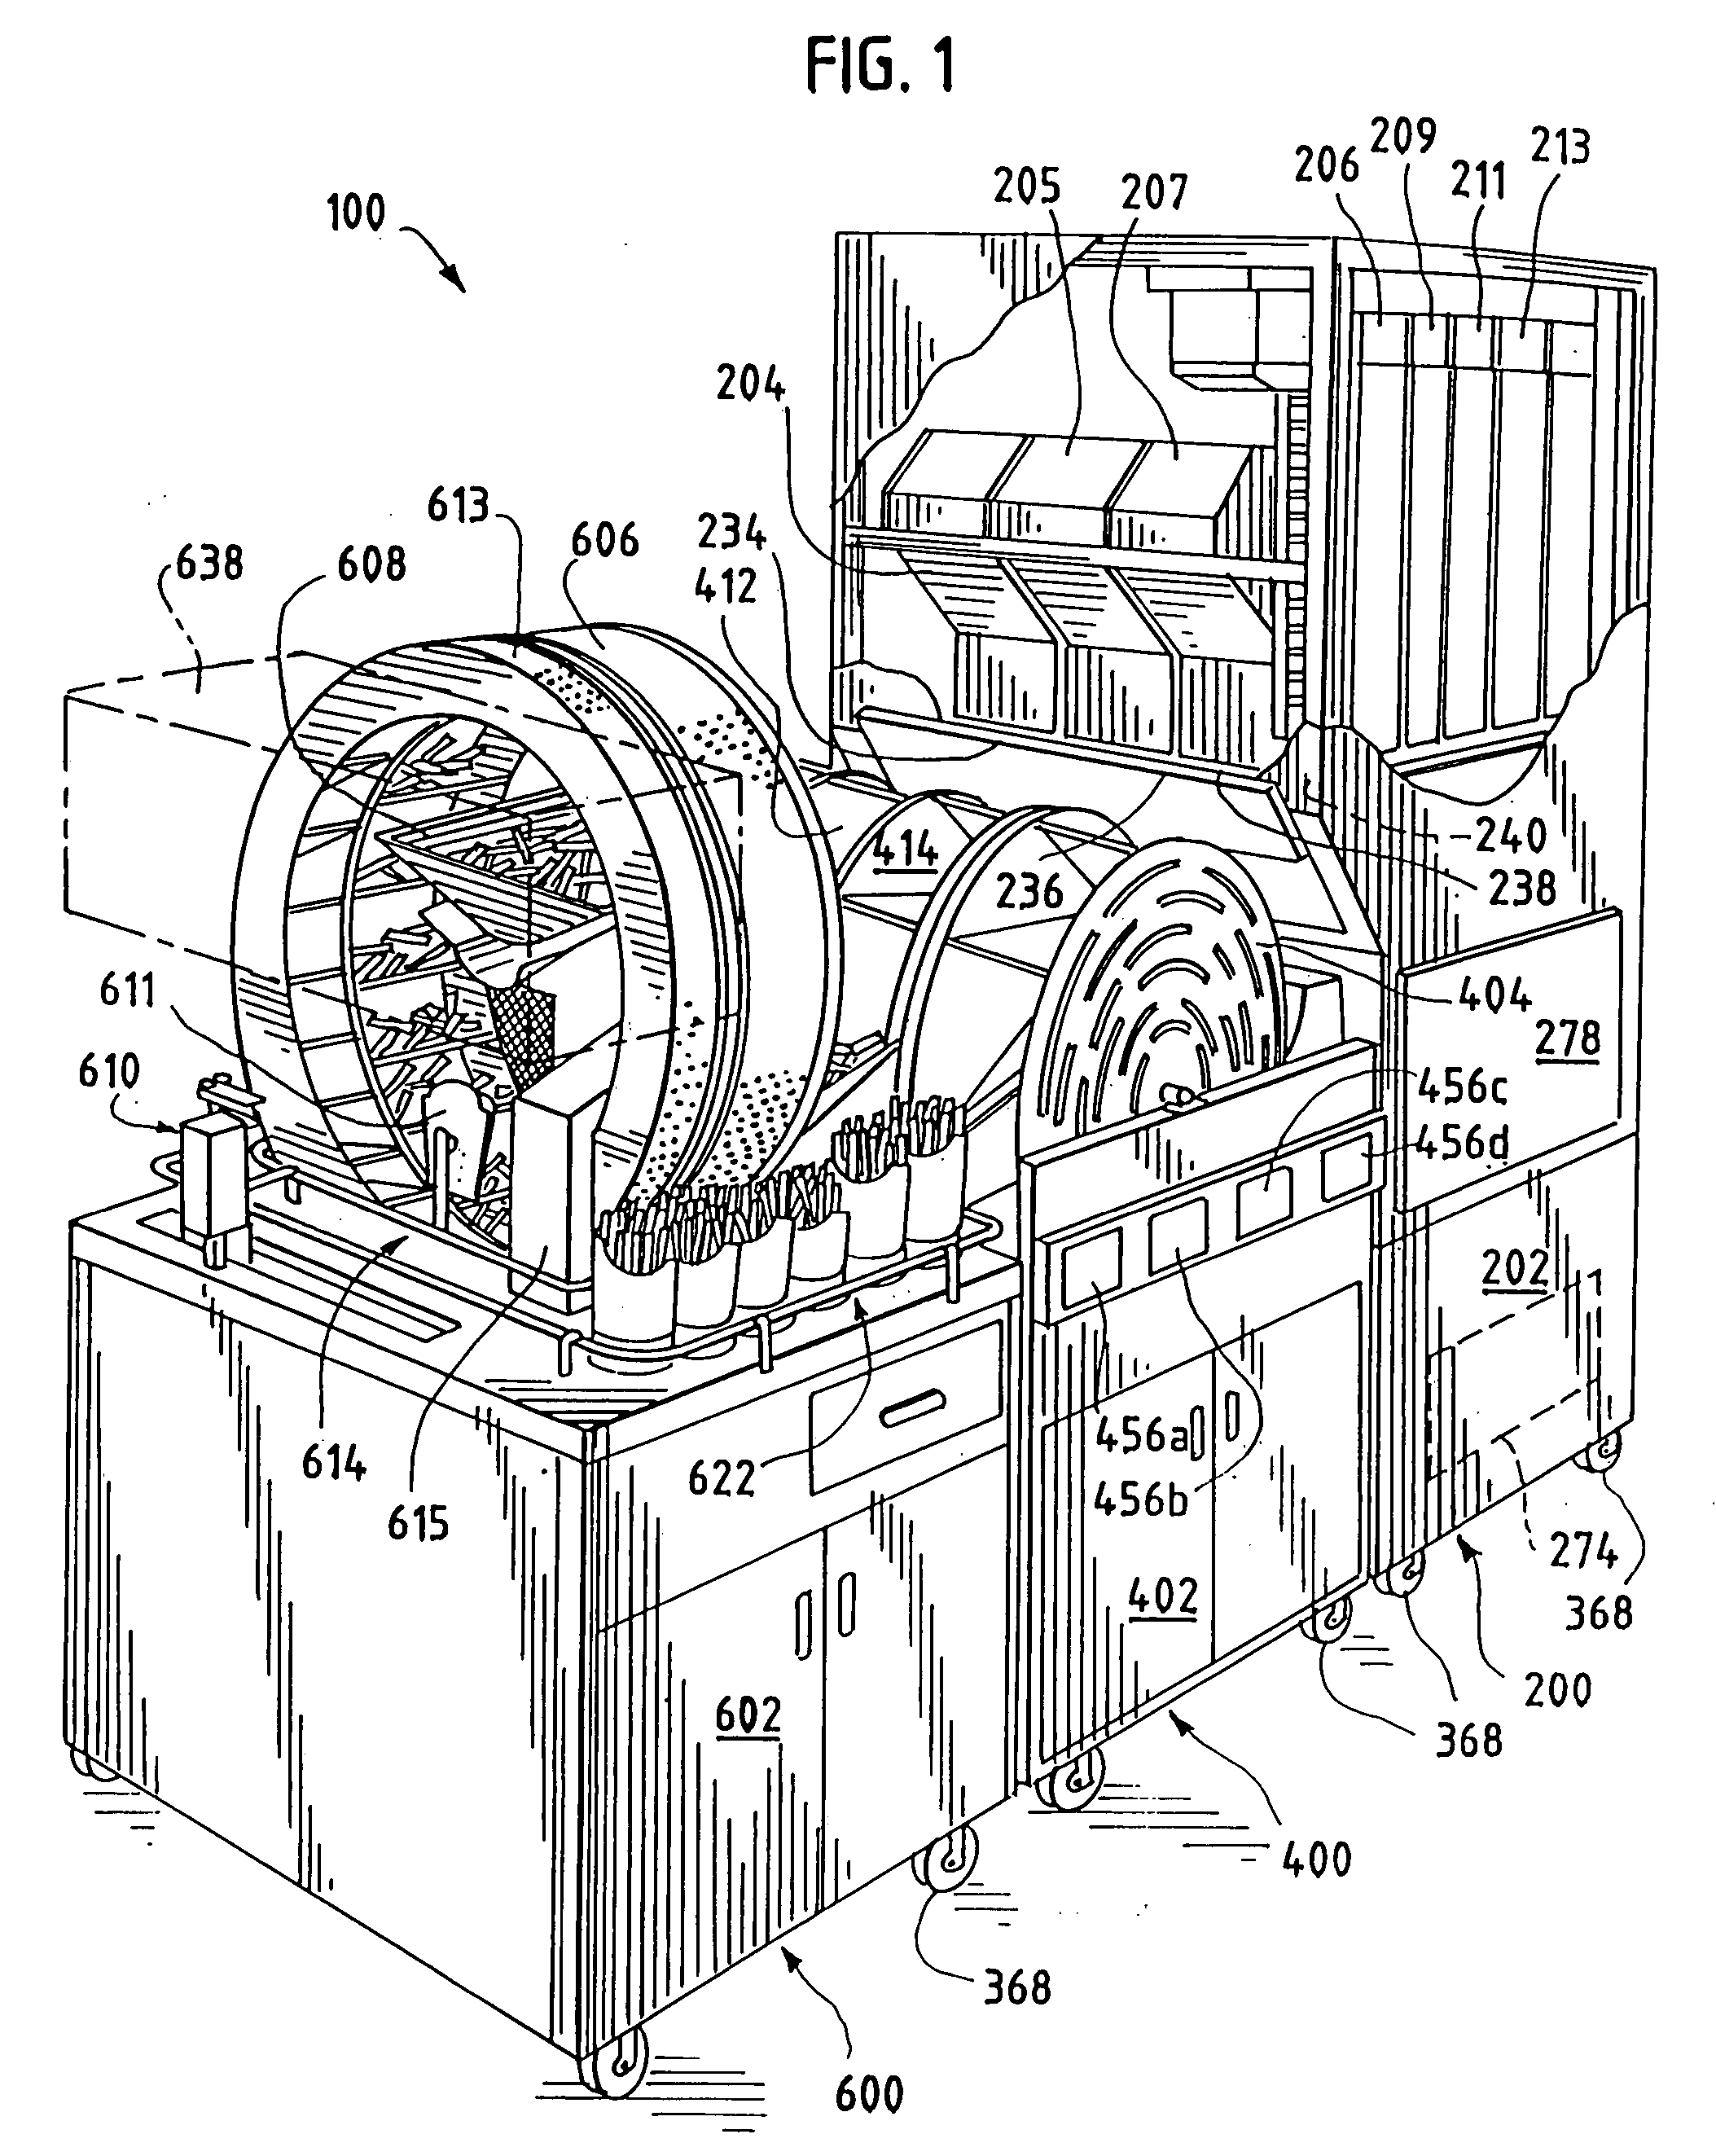 Automated method of packaging food items